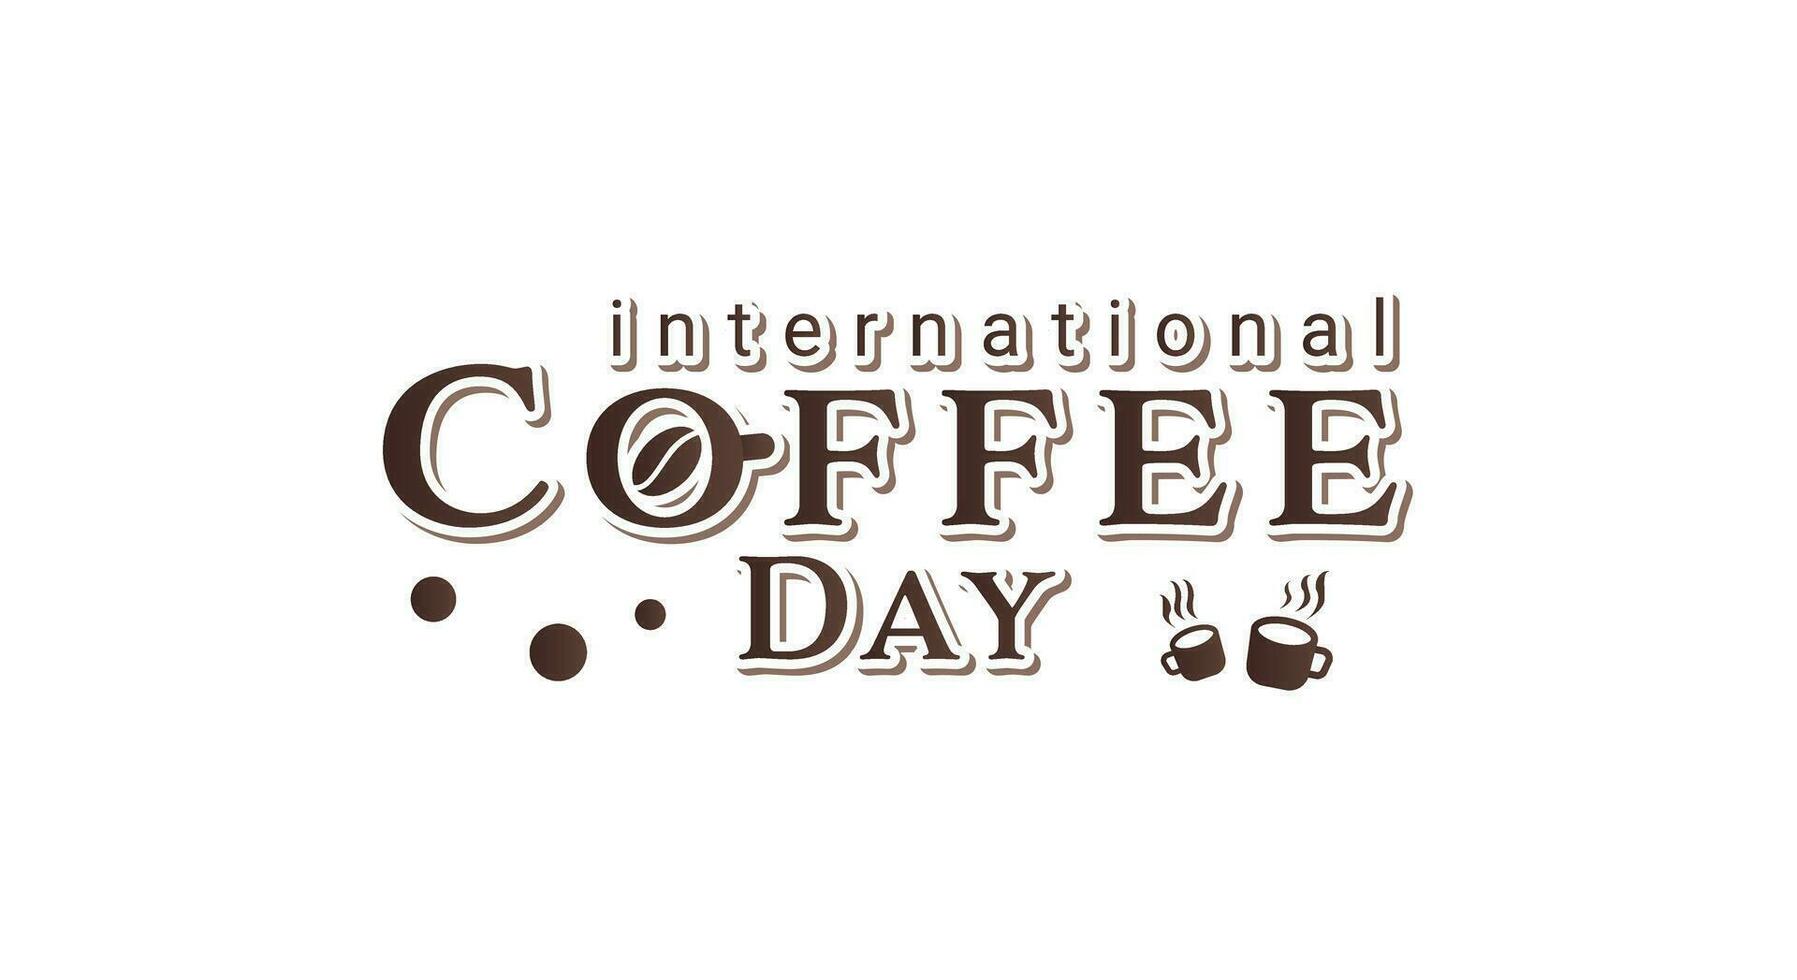 October 1st celebration of international coffee day. Template design for background, banner, poster, greeting card, advertising vector